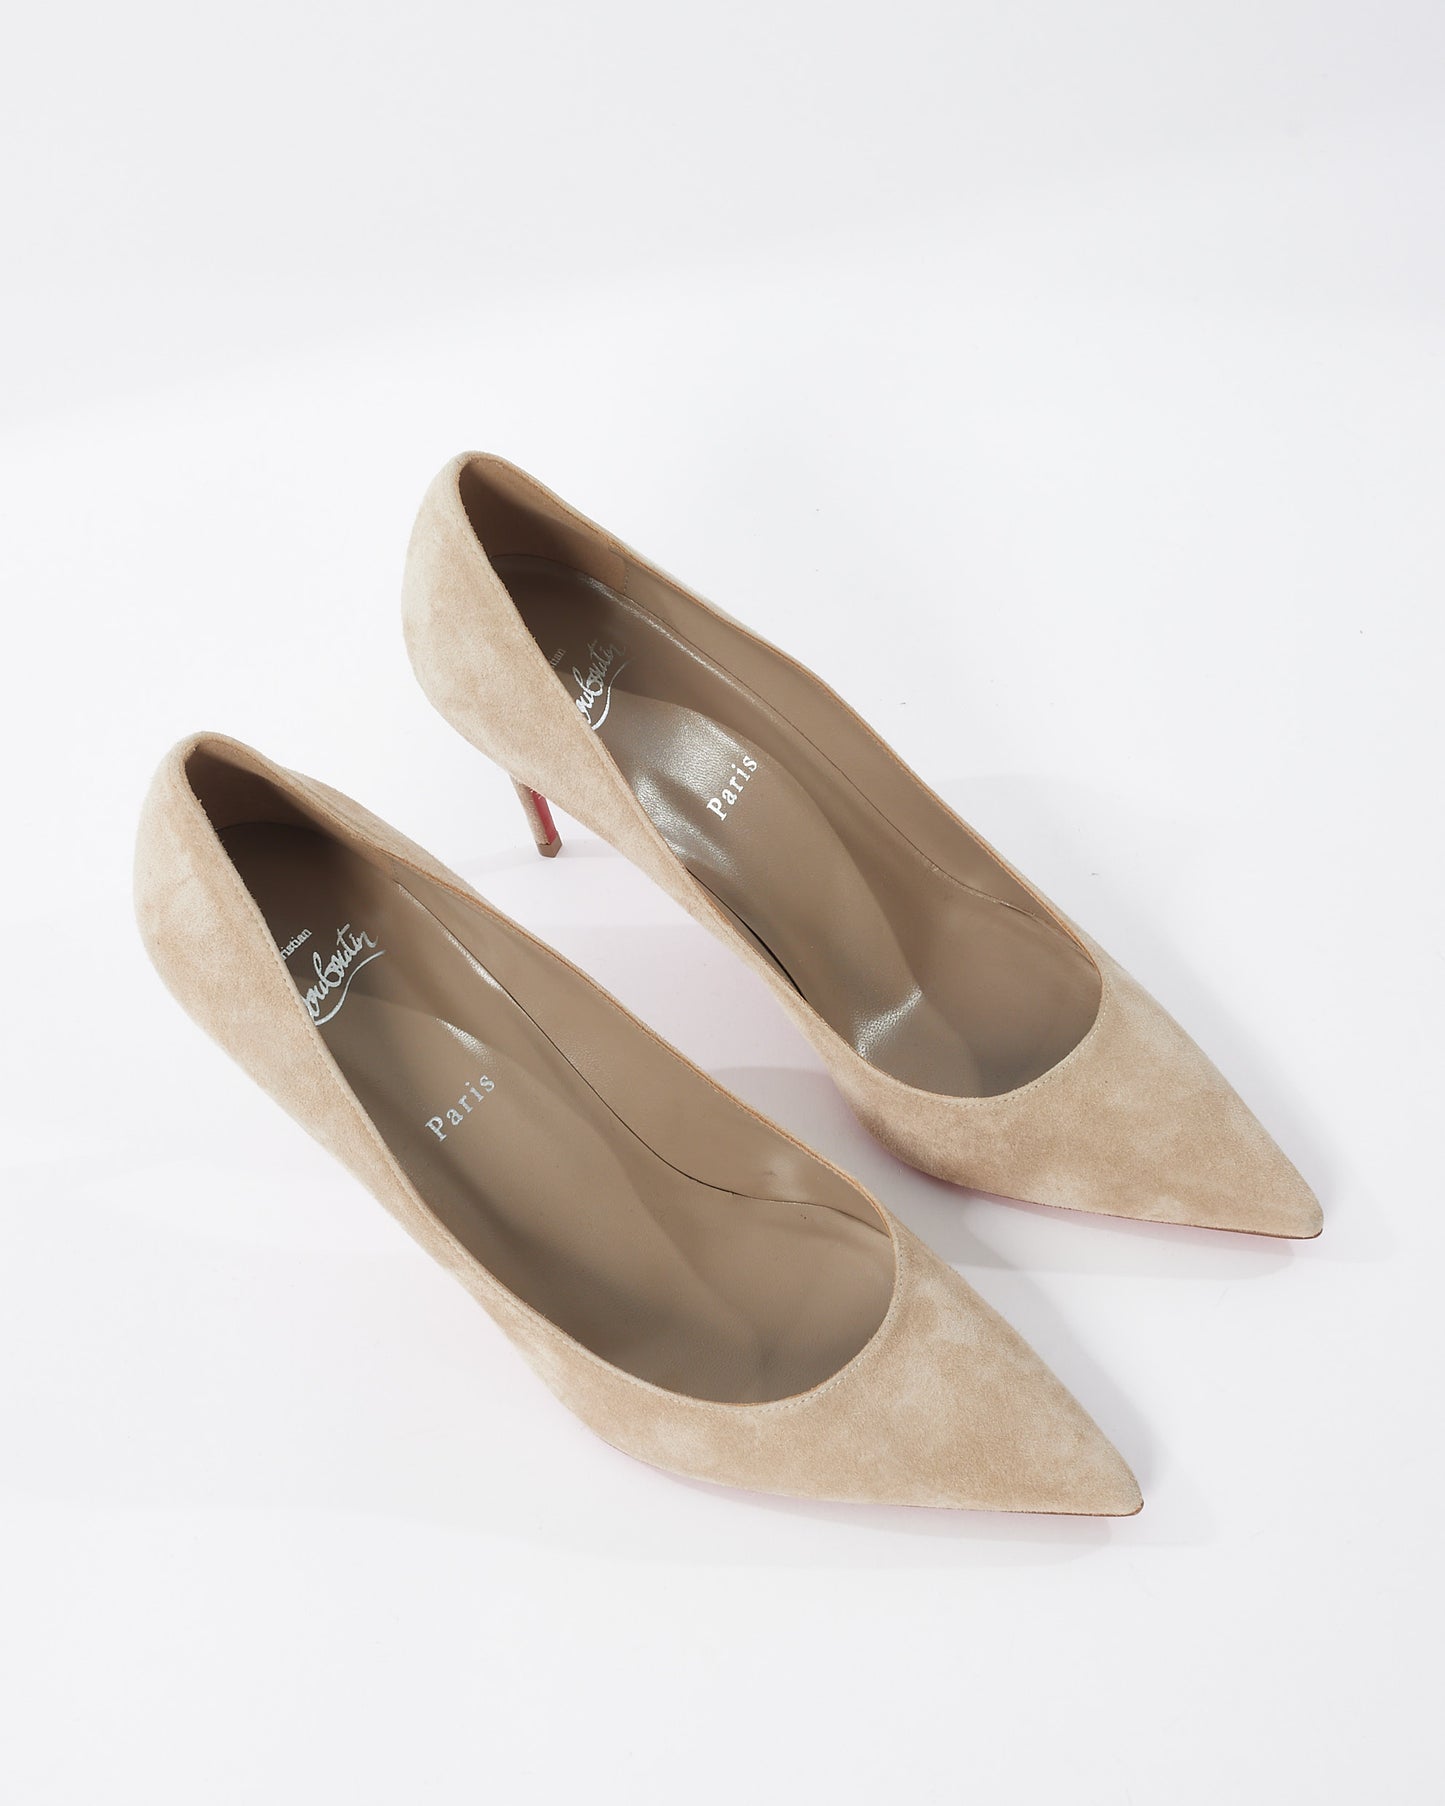 Christian Louboutin Beige Suede Kate 85mm Pumps - 41